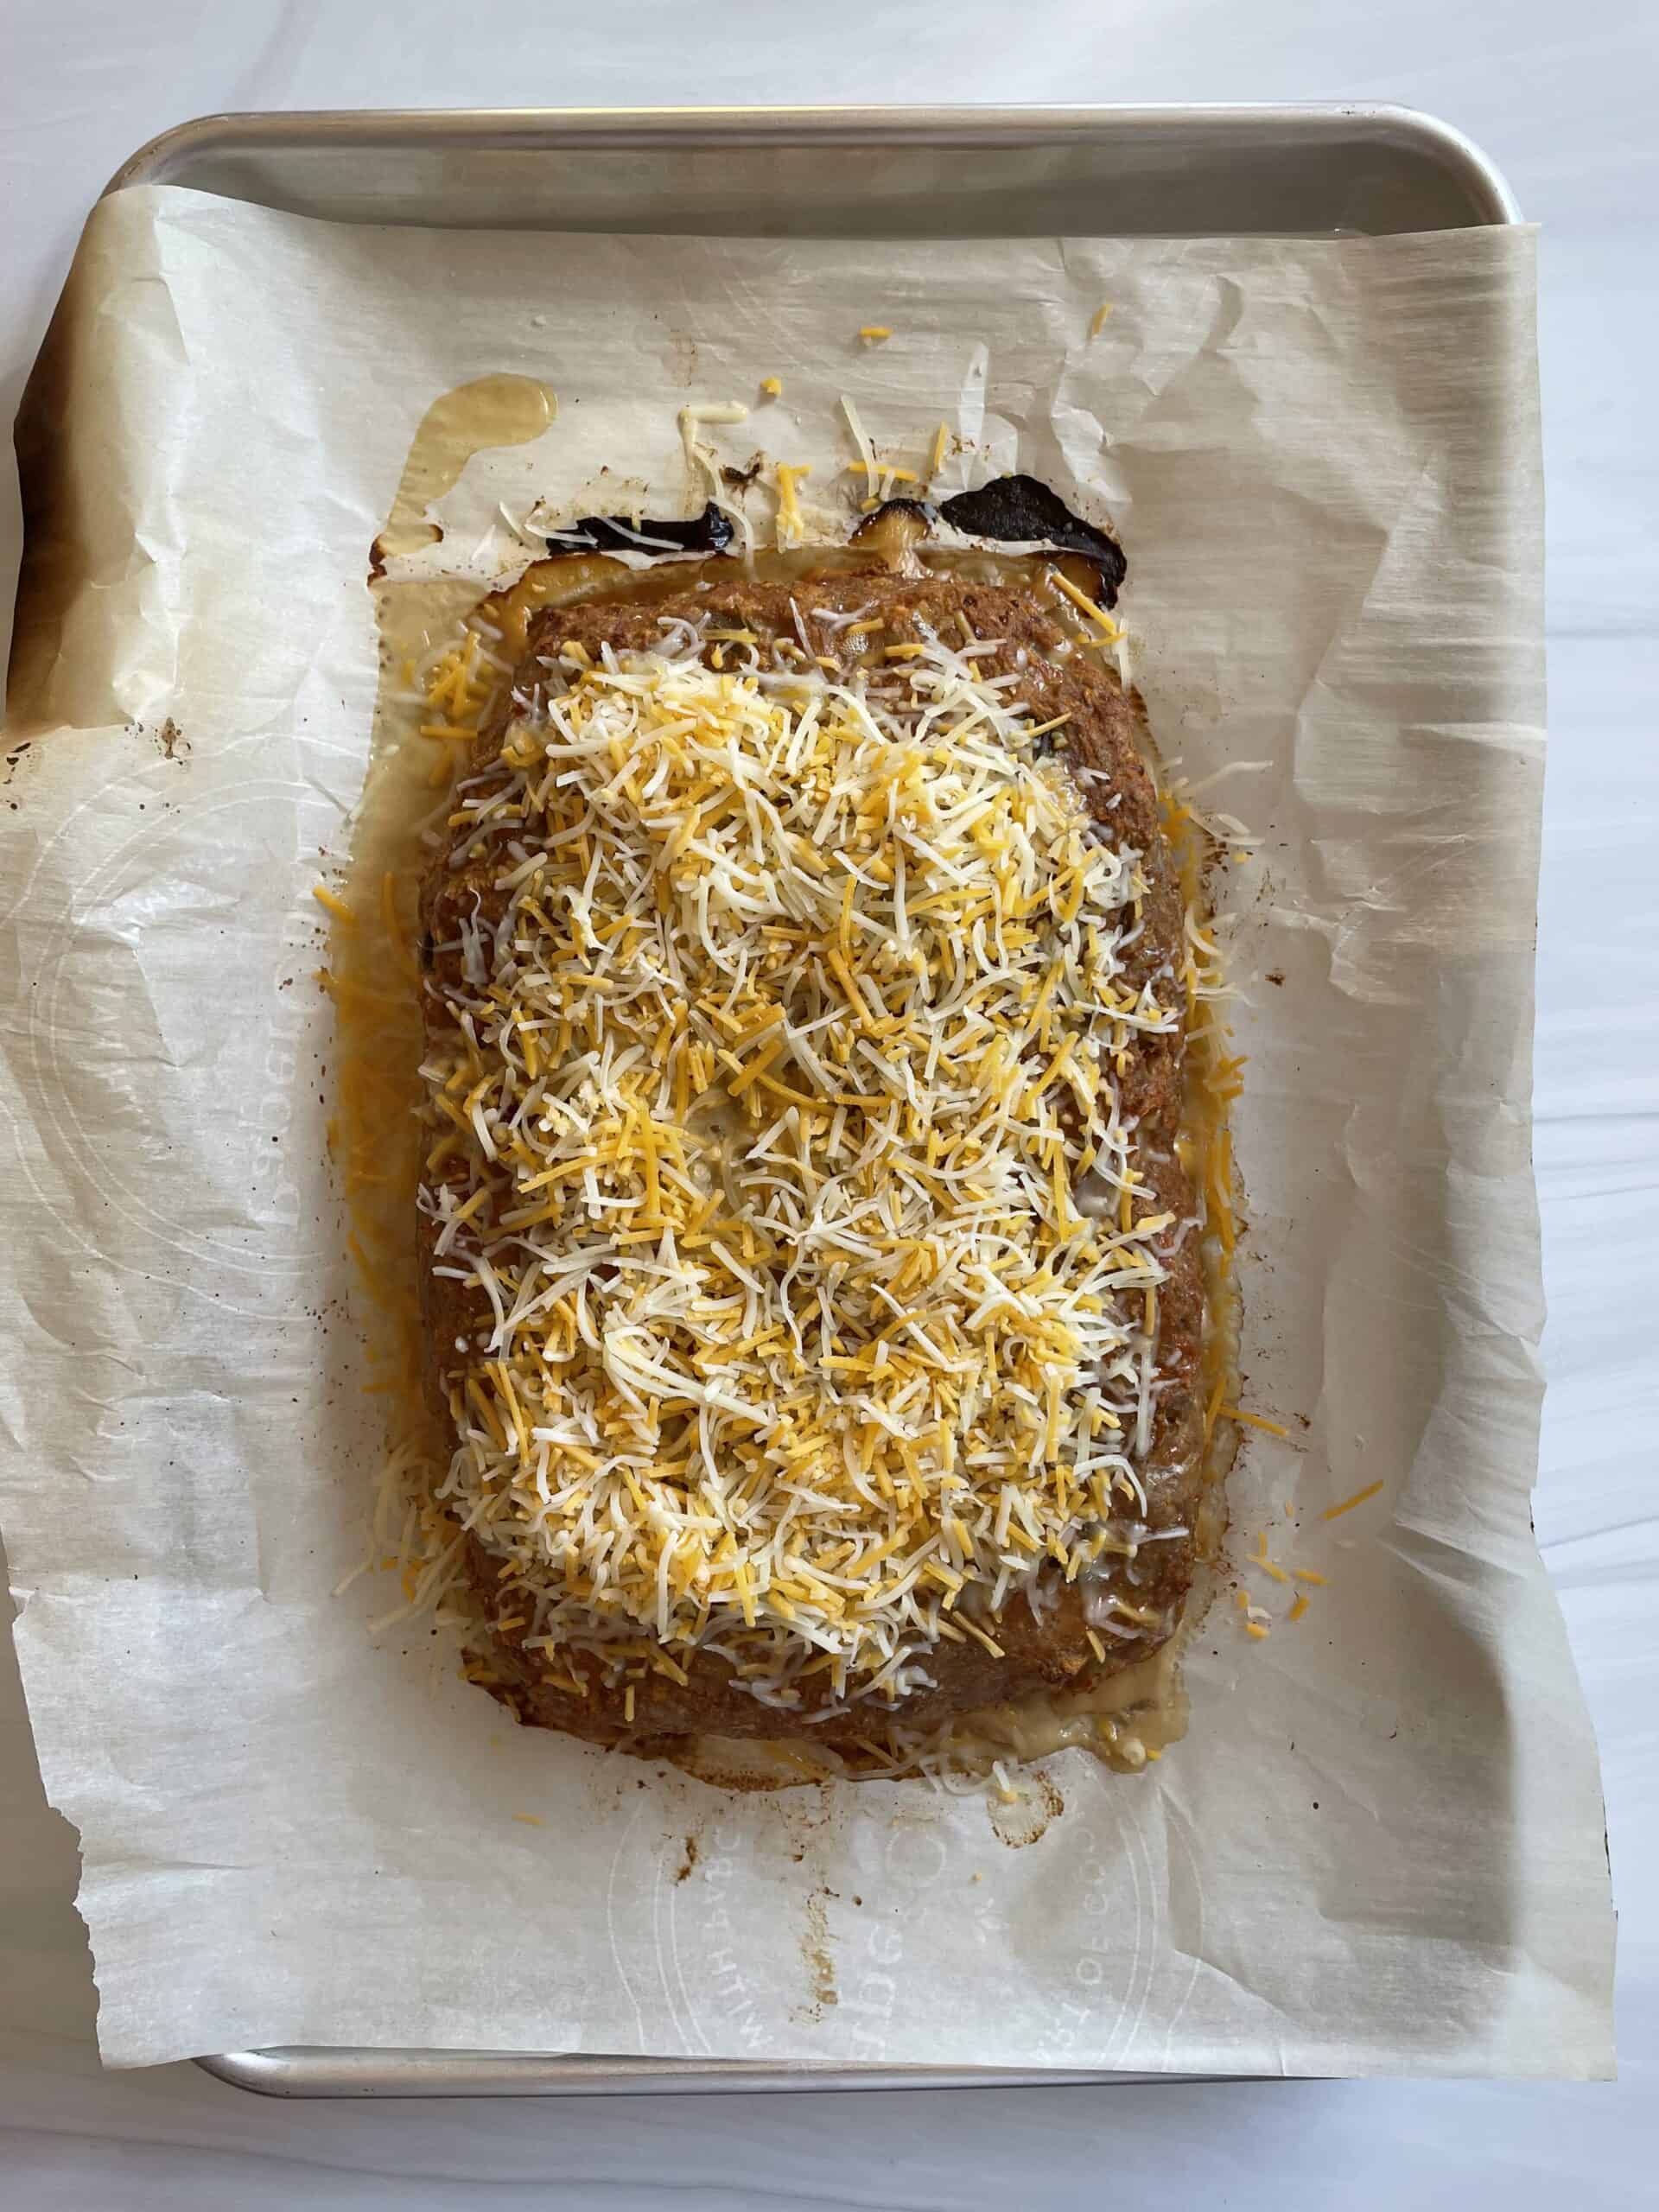 Cooked taco meatloaf on a parchment lined baking sheet topped with cold shredded cheese.